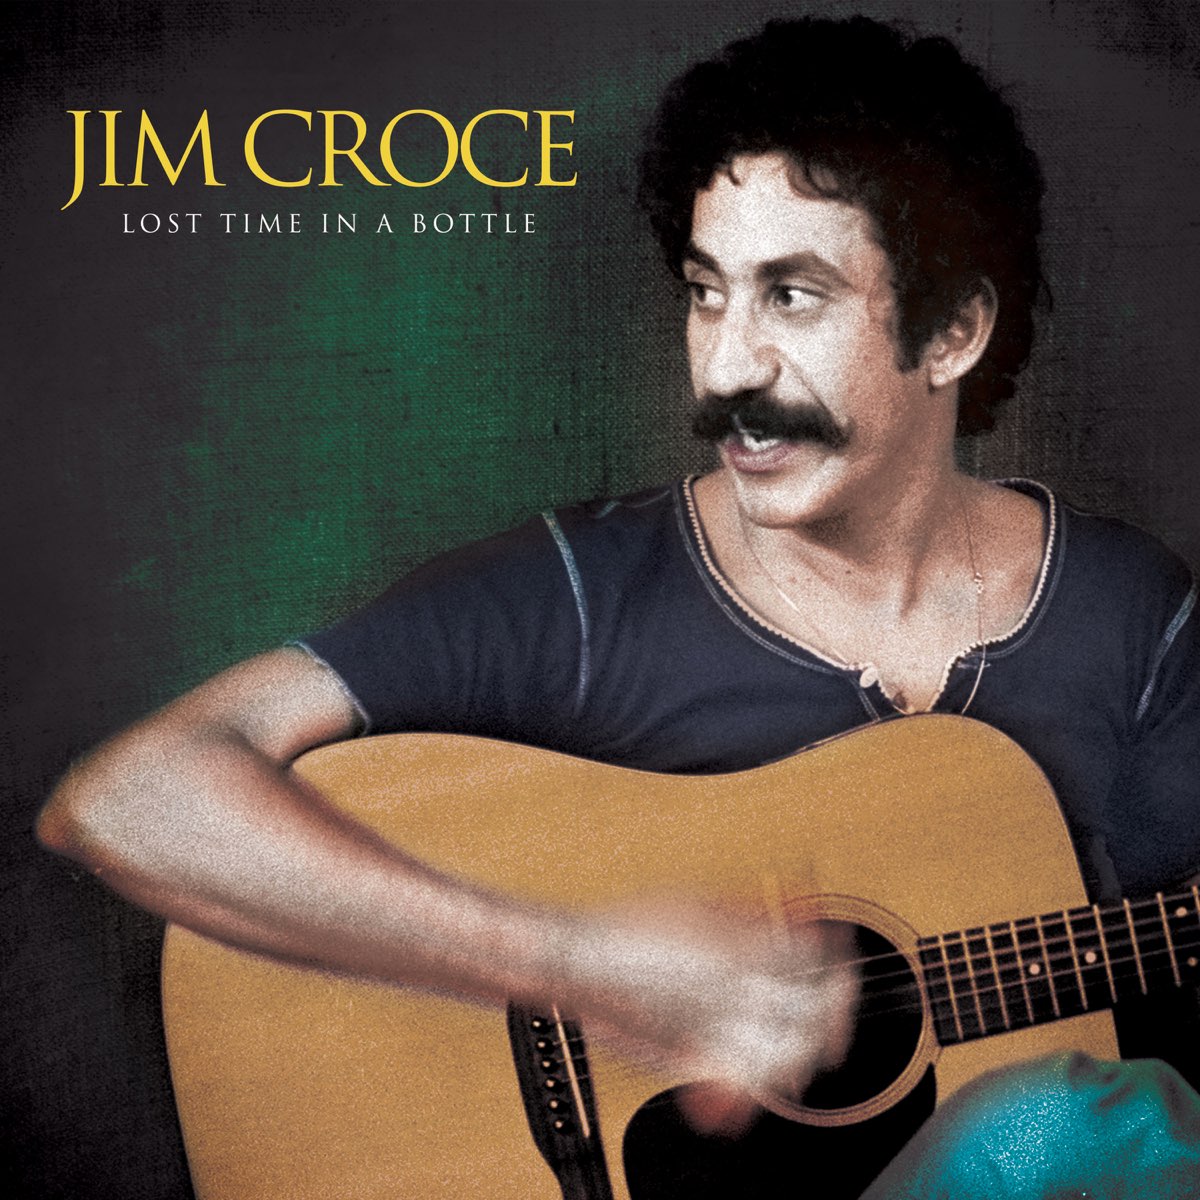 Lost Time in a Bottle by Jim Croce on Apple Music